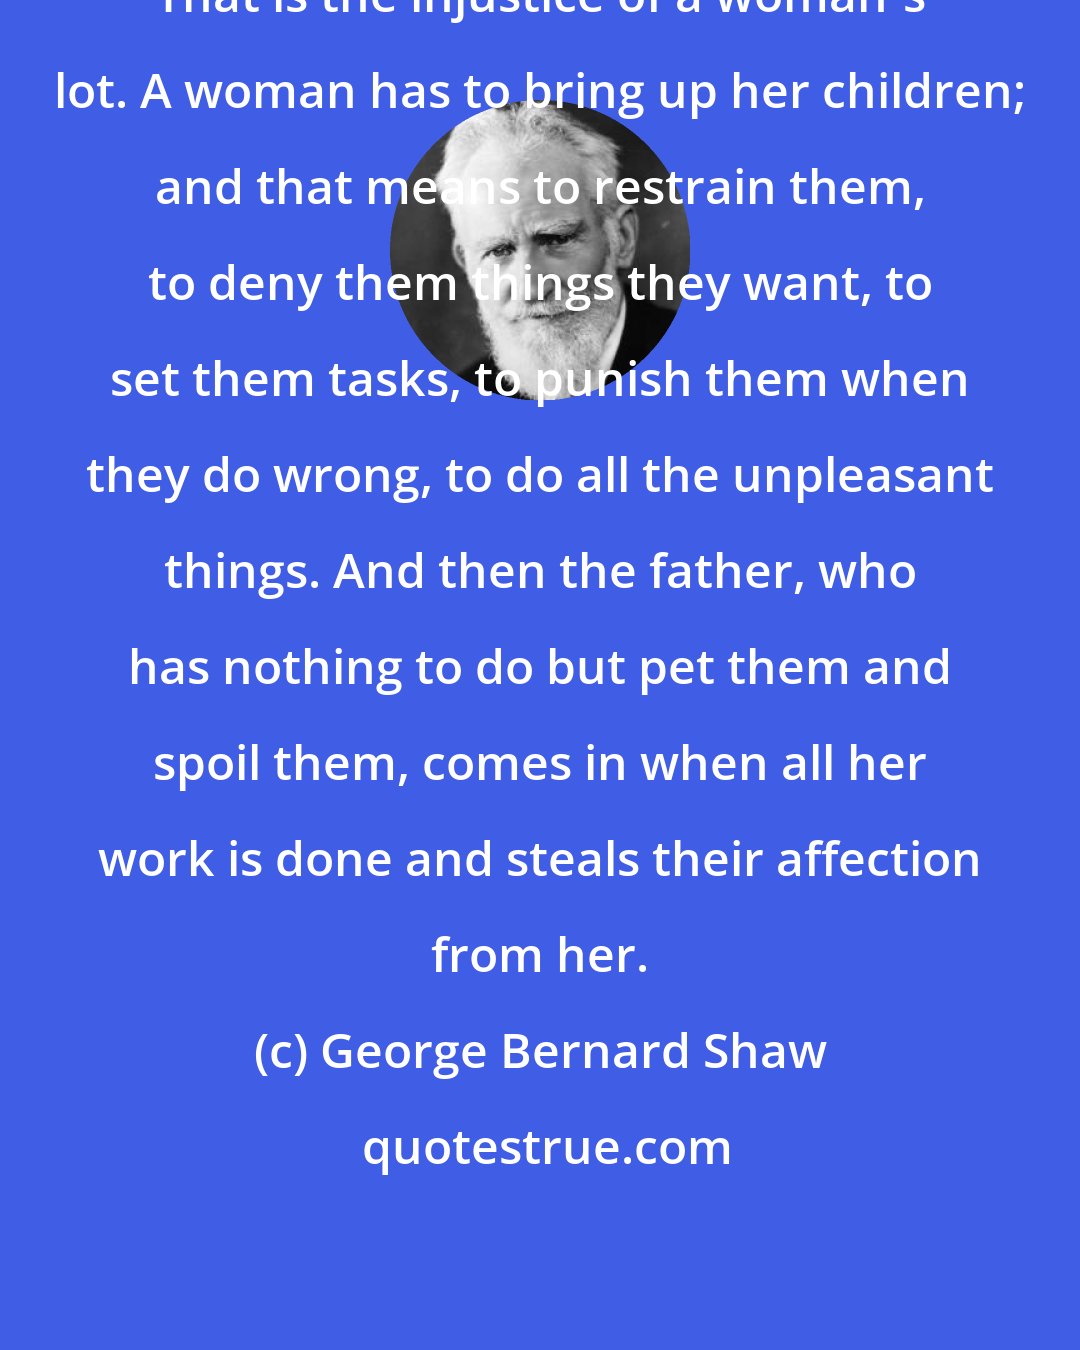 George Bernard Shaw: That is the injustice of a woman's lot. A woman has to bring up her children; and that means to restrain them, to deny them things they want, to set them tasks, to punish them when they do wrong, to do all the unpleasant things. And then the father, who has nothing to do but pet them and spoil them, comes in when all her work is done and steals their affection from her.